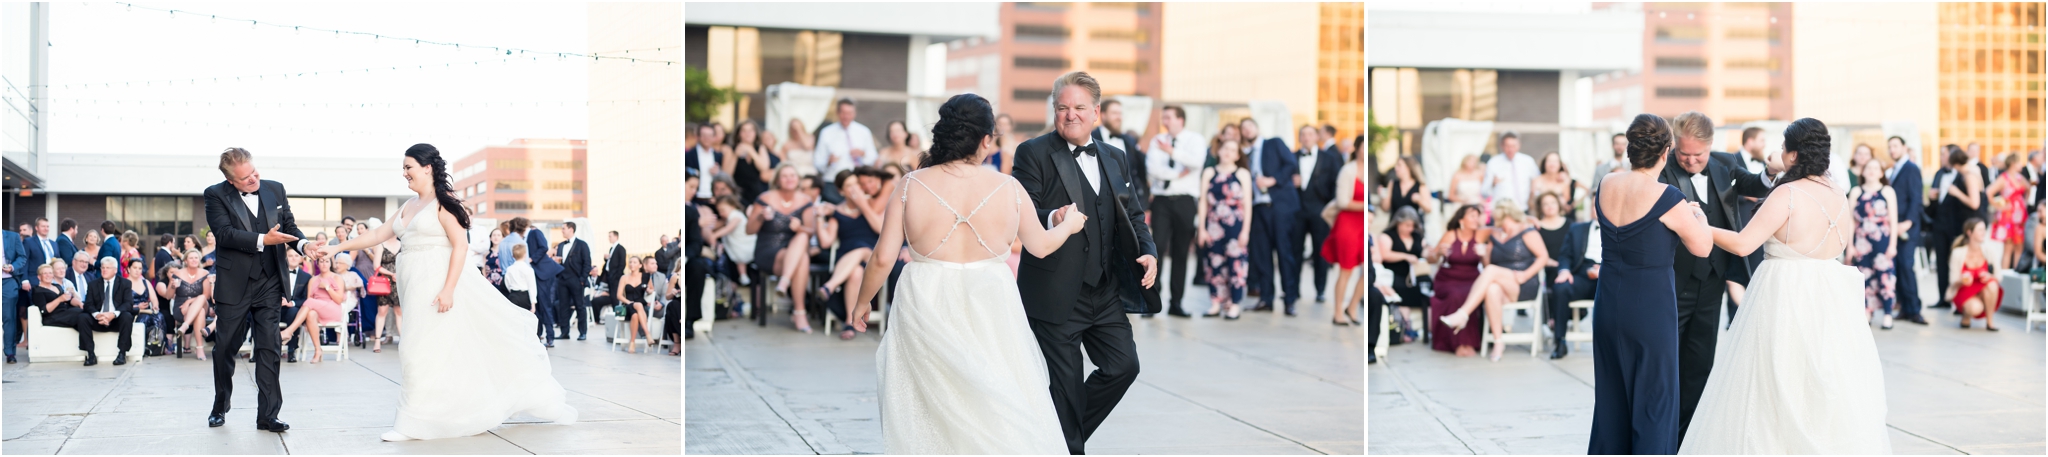 Regions Tower | Sarah and Rachel Wedding Photographers | Indianapolis, IN | Father Daughter Rooftop Dance